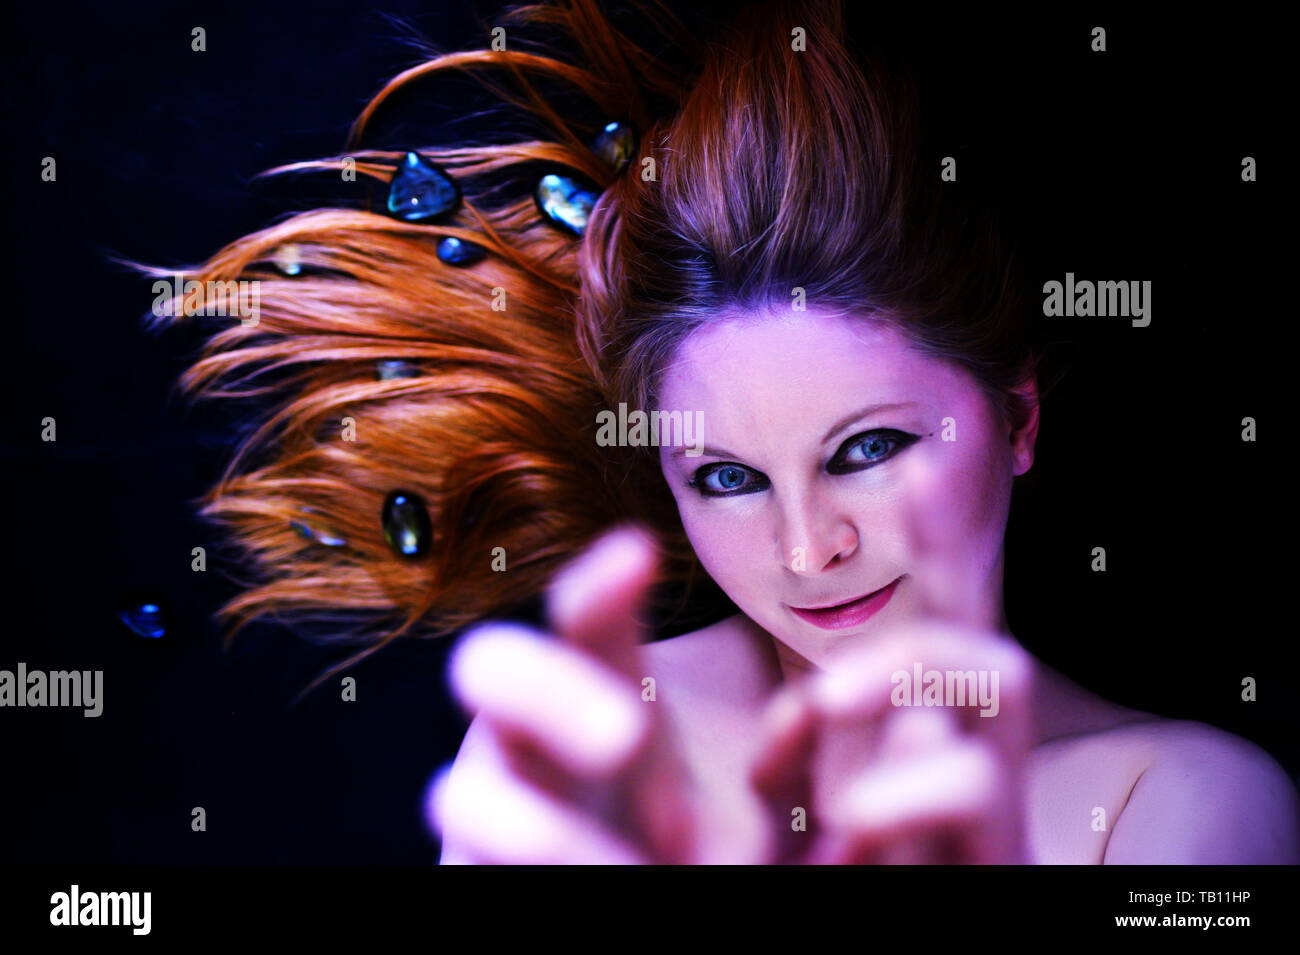 Red hair woman laying on the black floor. She is smiling. Fantasy or dream photo. Stock Photo